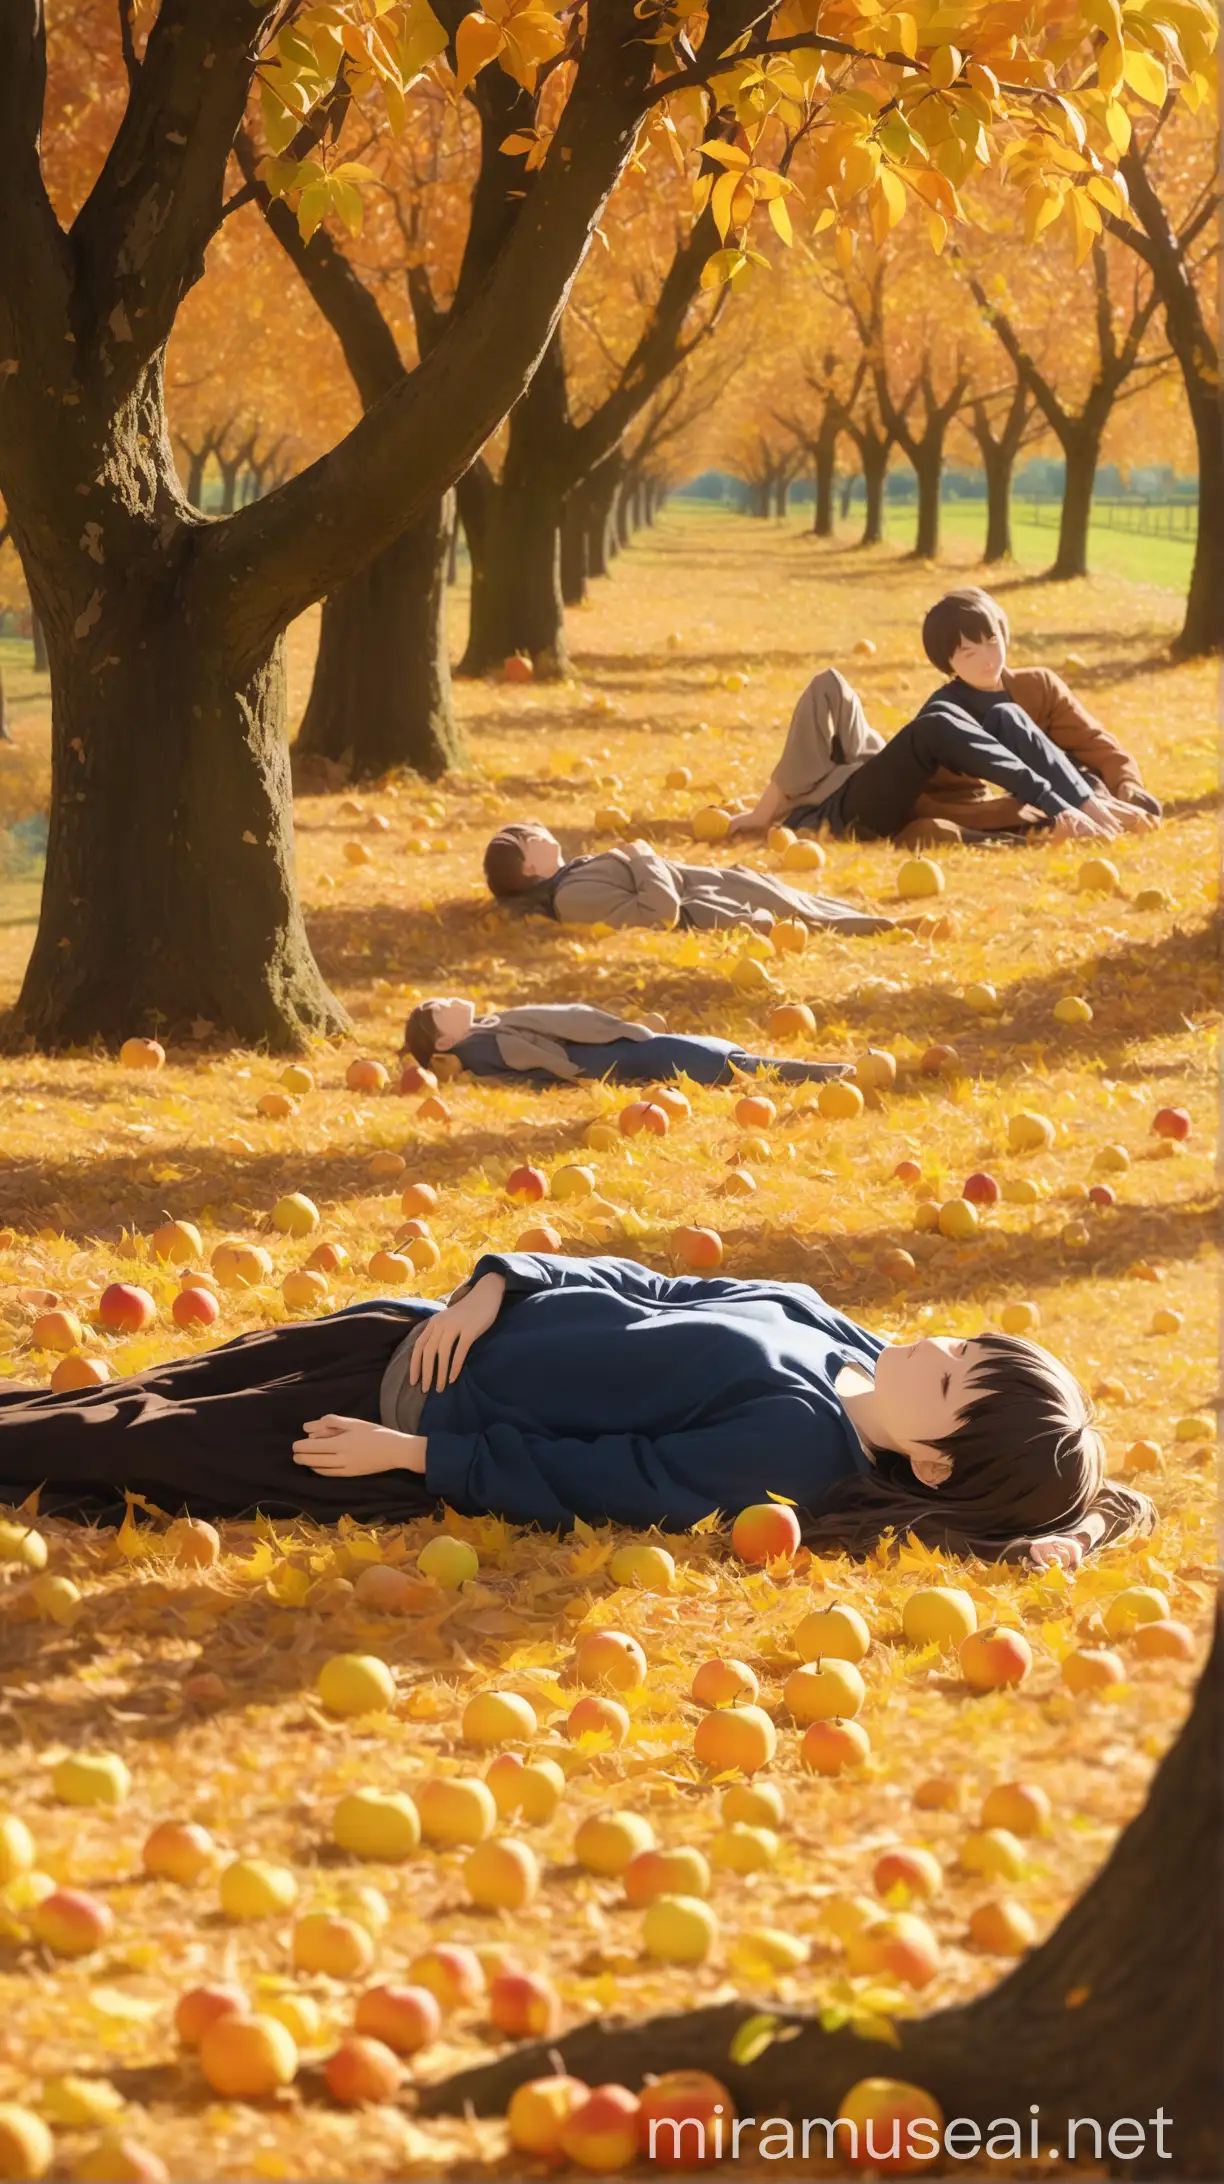 Relaxing Rural Youth Enjoying Autumn in Orchard